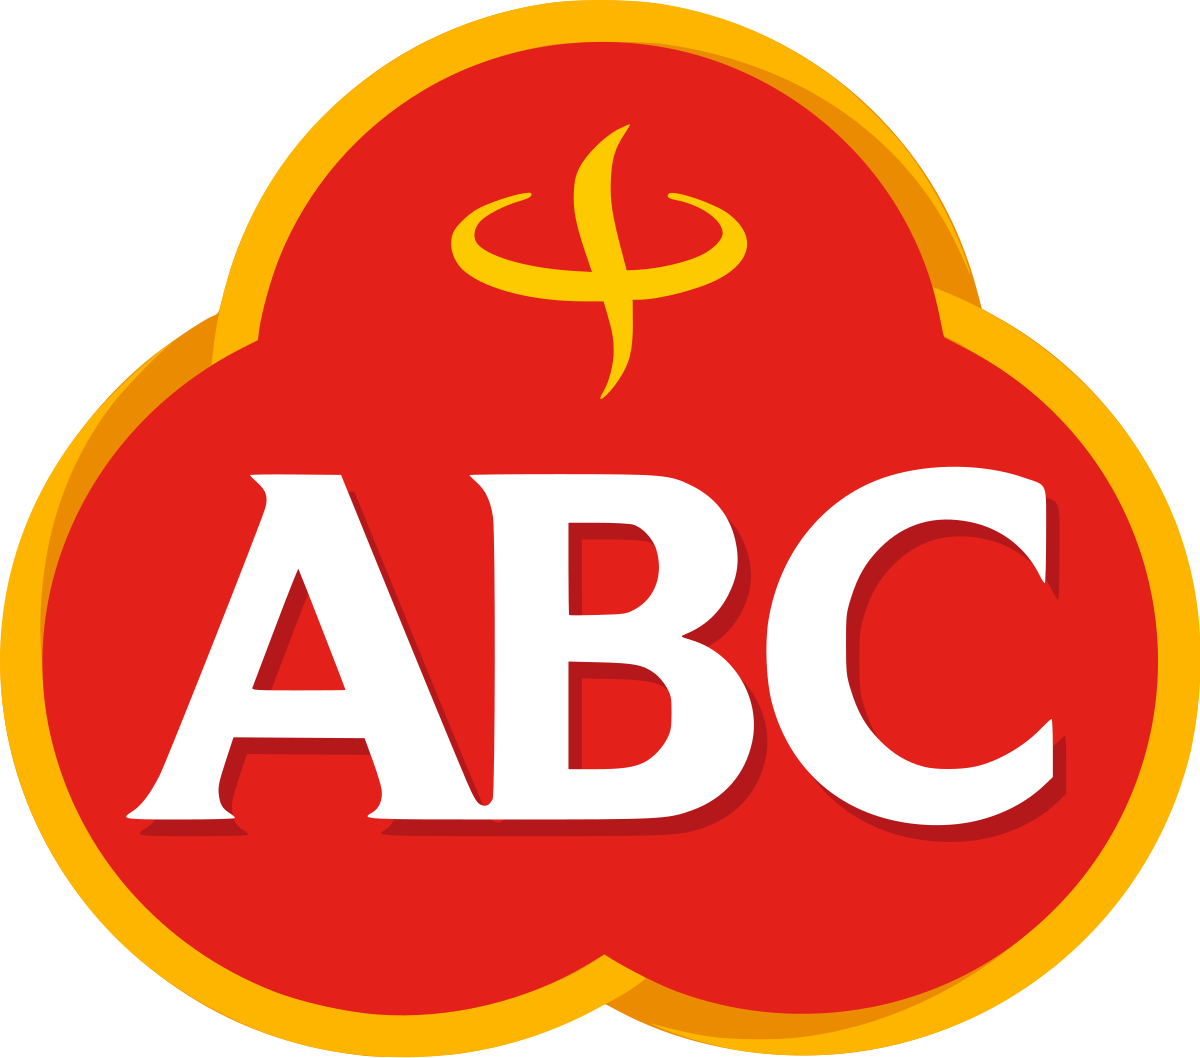 File:ABC food (2016).svg - Wikimedia Commons